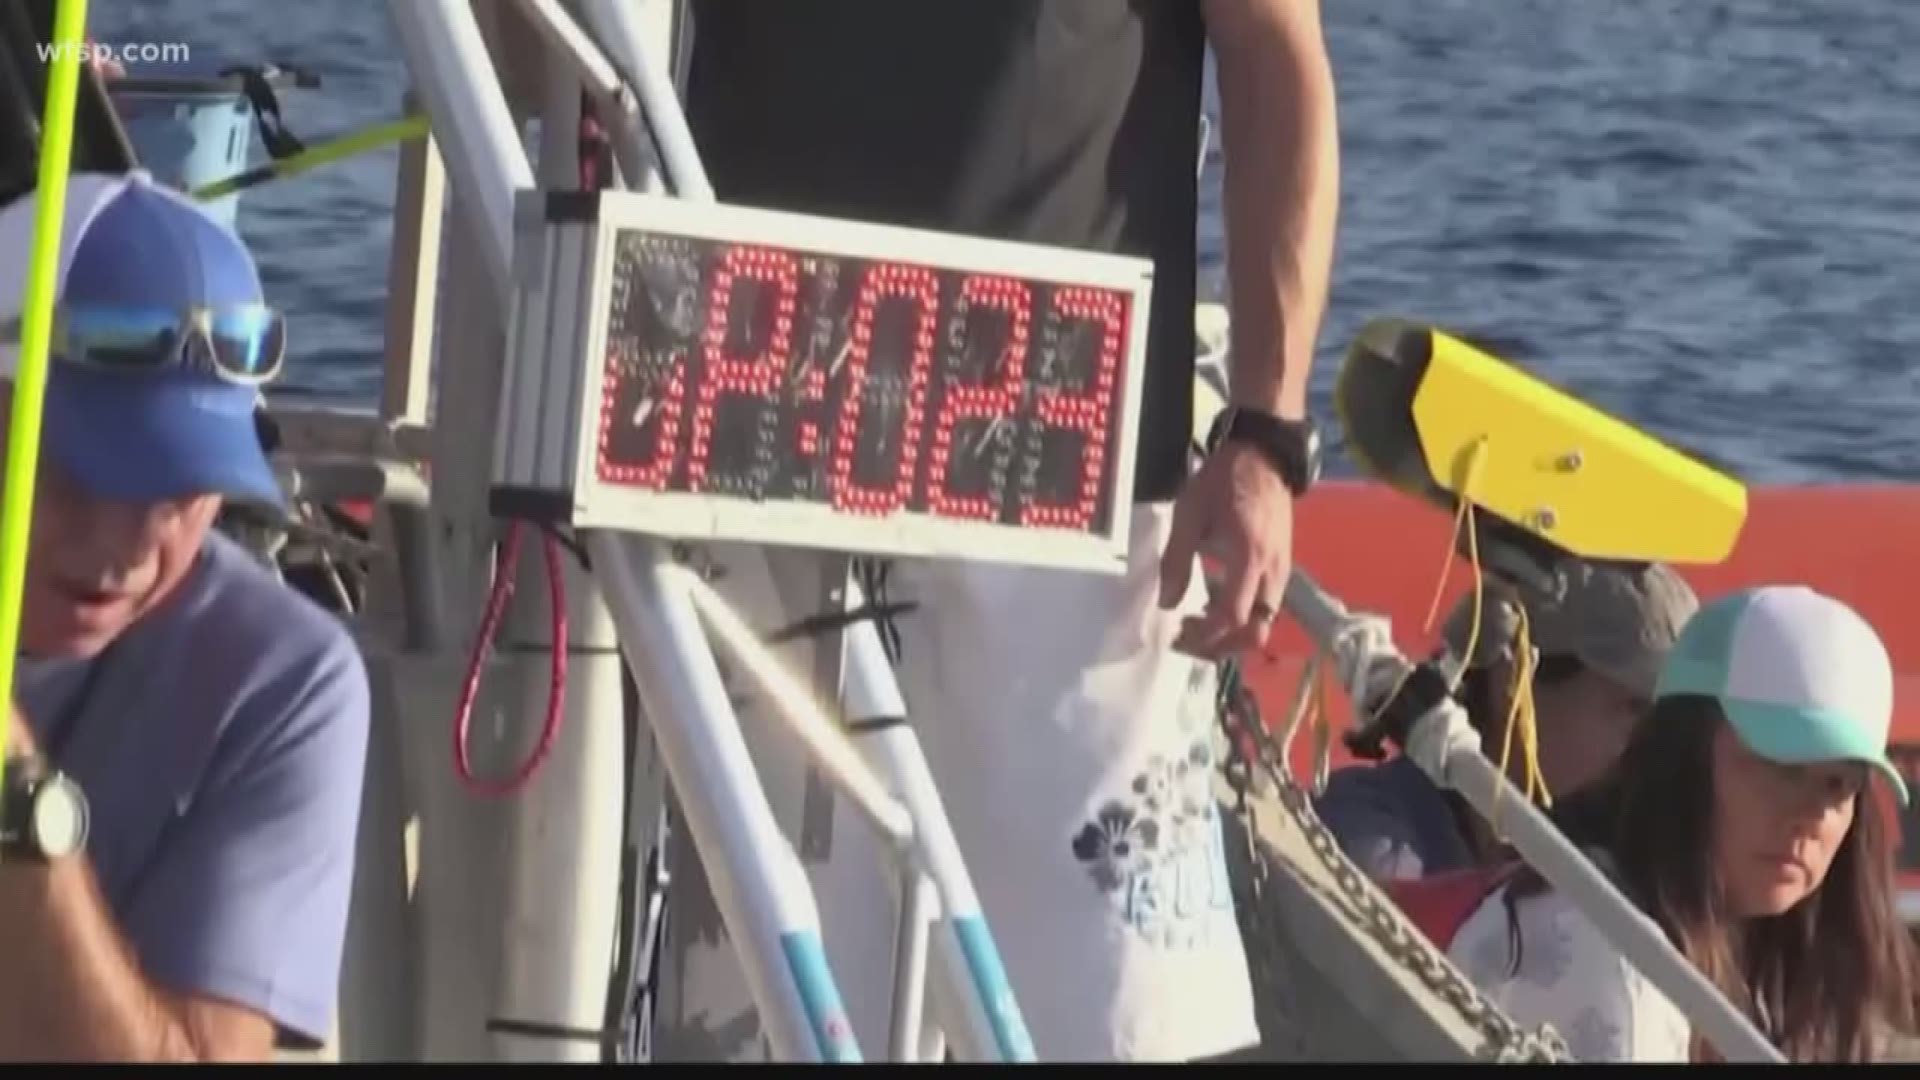 A Russia man brought home the world free diving championship this week diving 387-feet without taking a breath.
And that's not even a record.
The man is an 8-time world champion and set the record last year at 426 feet.